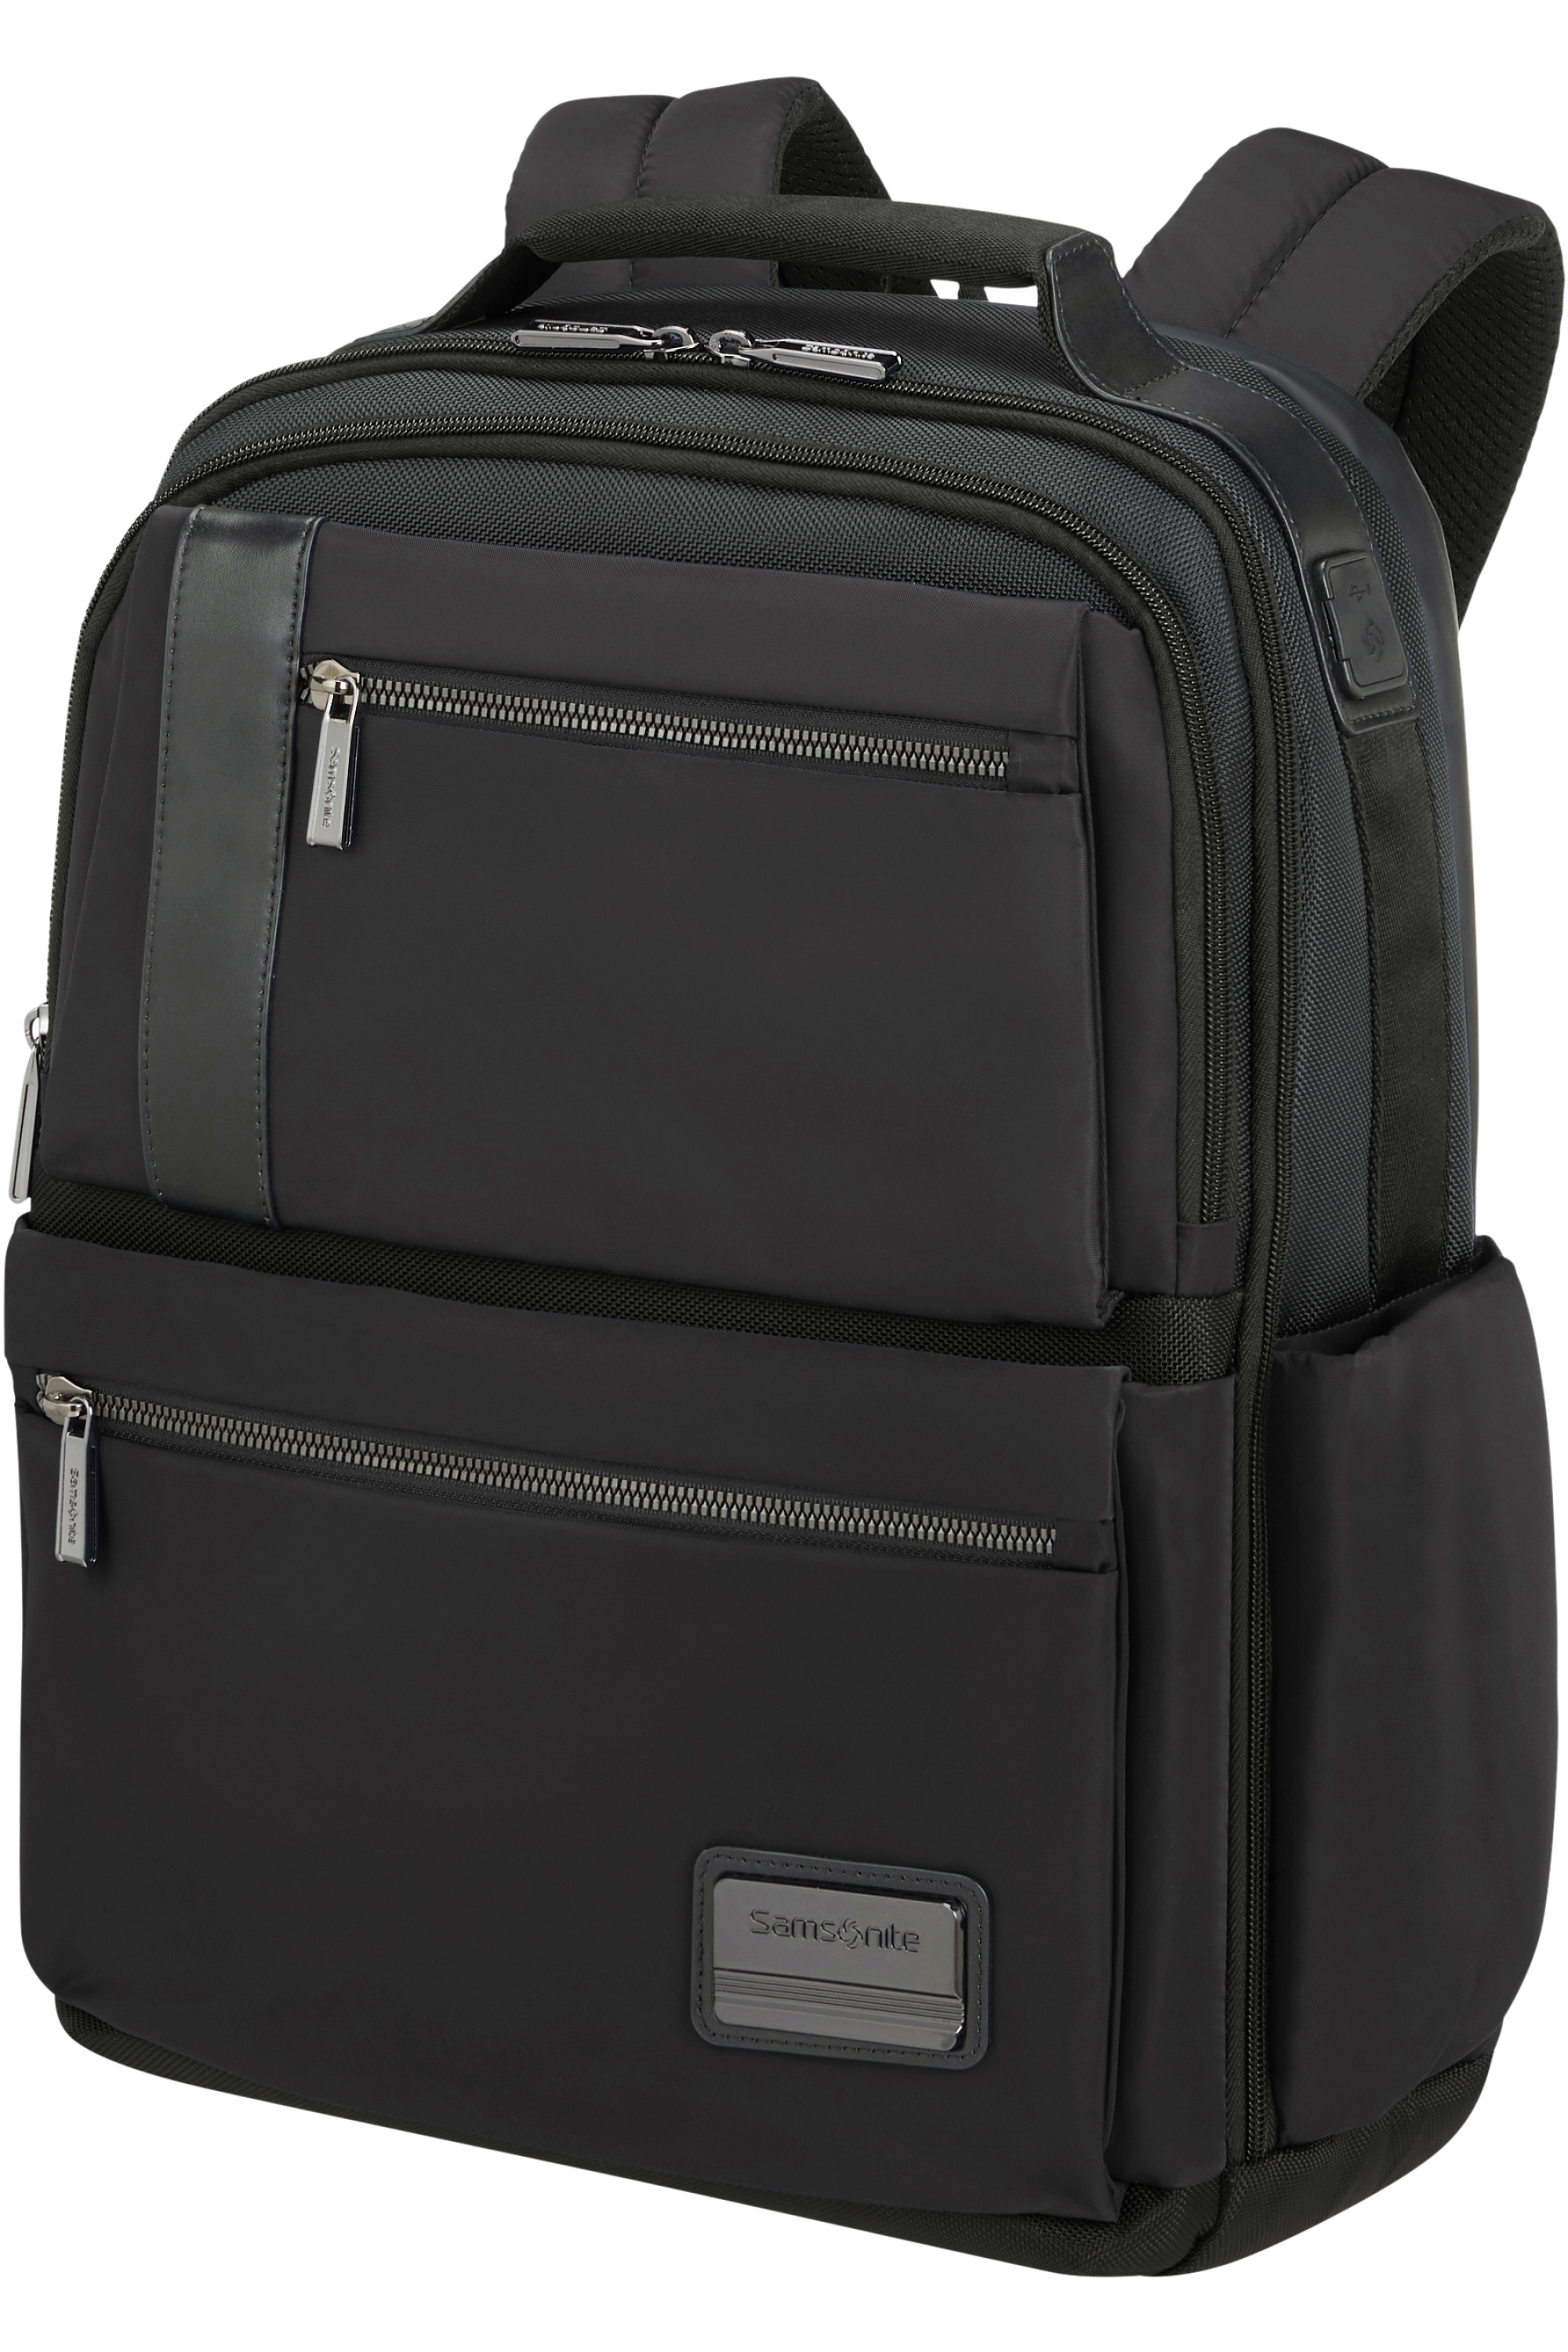 137208-1041-137208_1041_openroad_2-0_laptop_backpack_15-6_front34-519bc46e-050a-4fd6-8a9d-acbb00e759ae-png